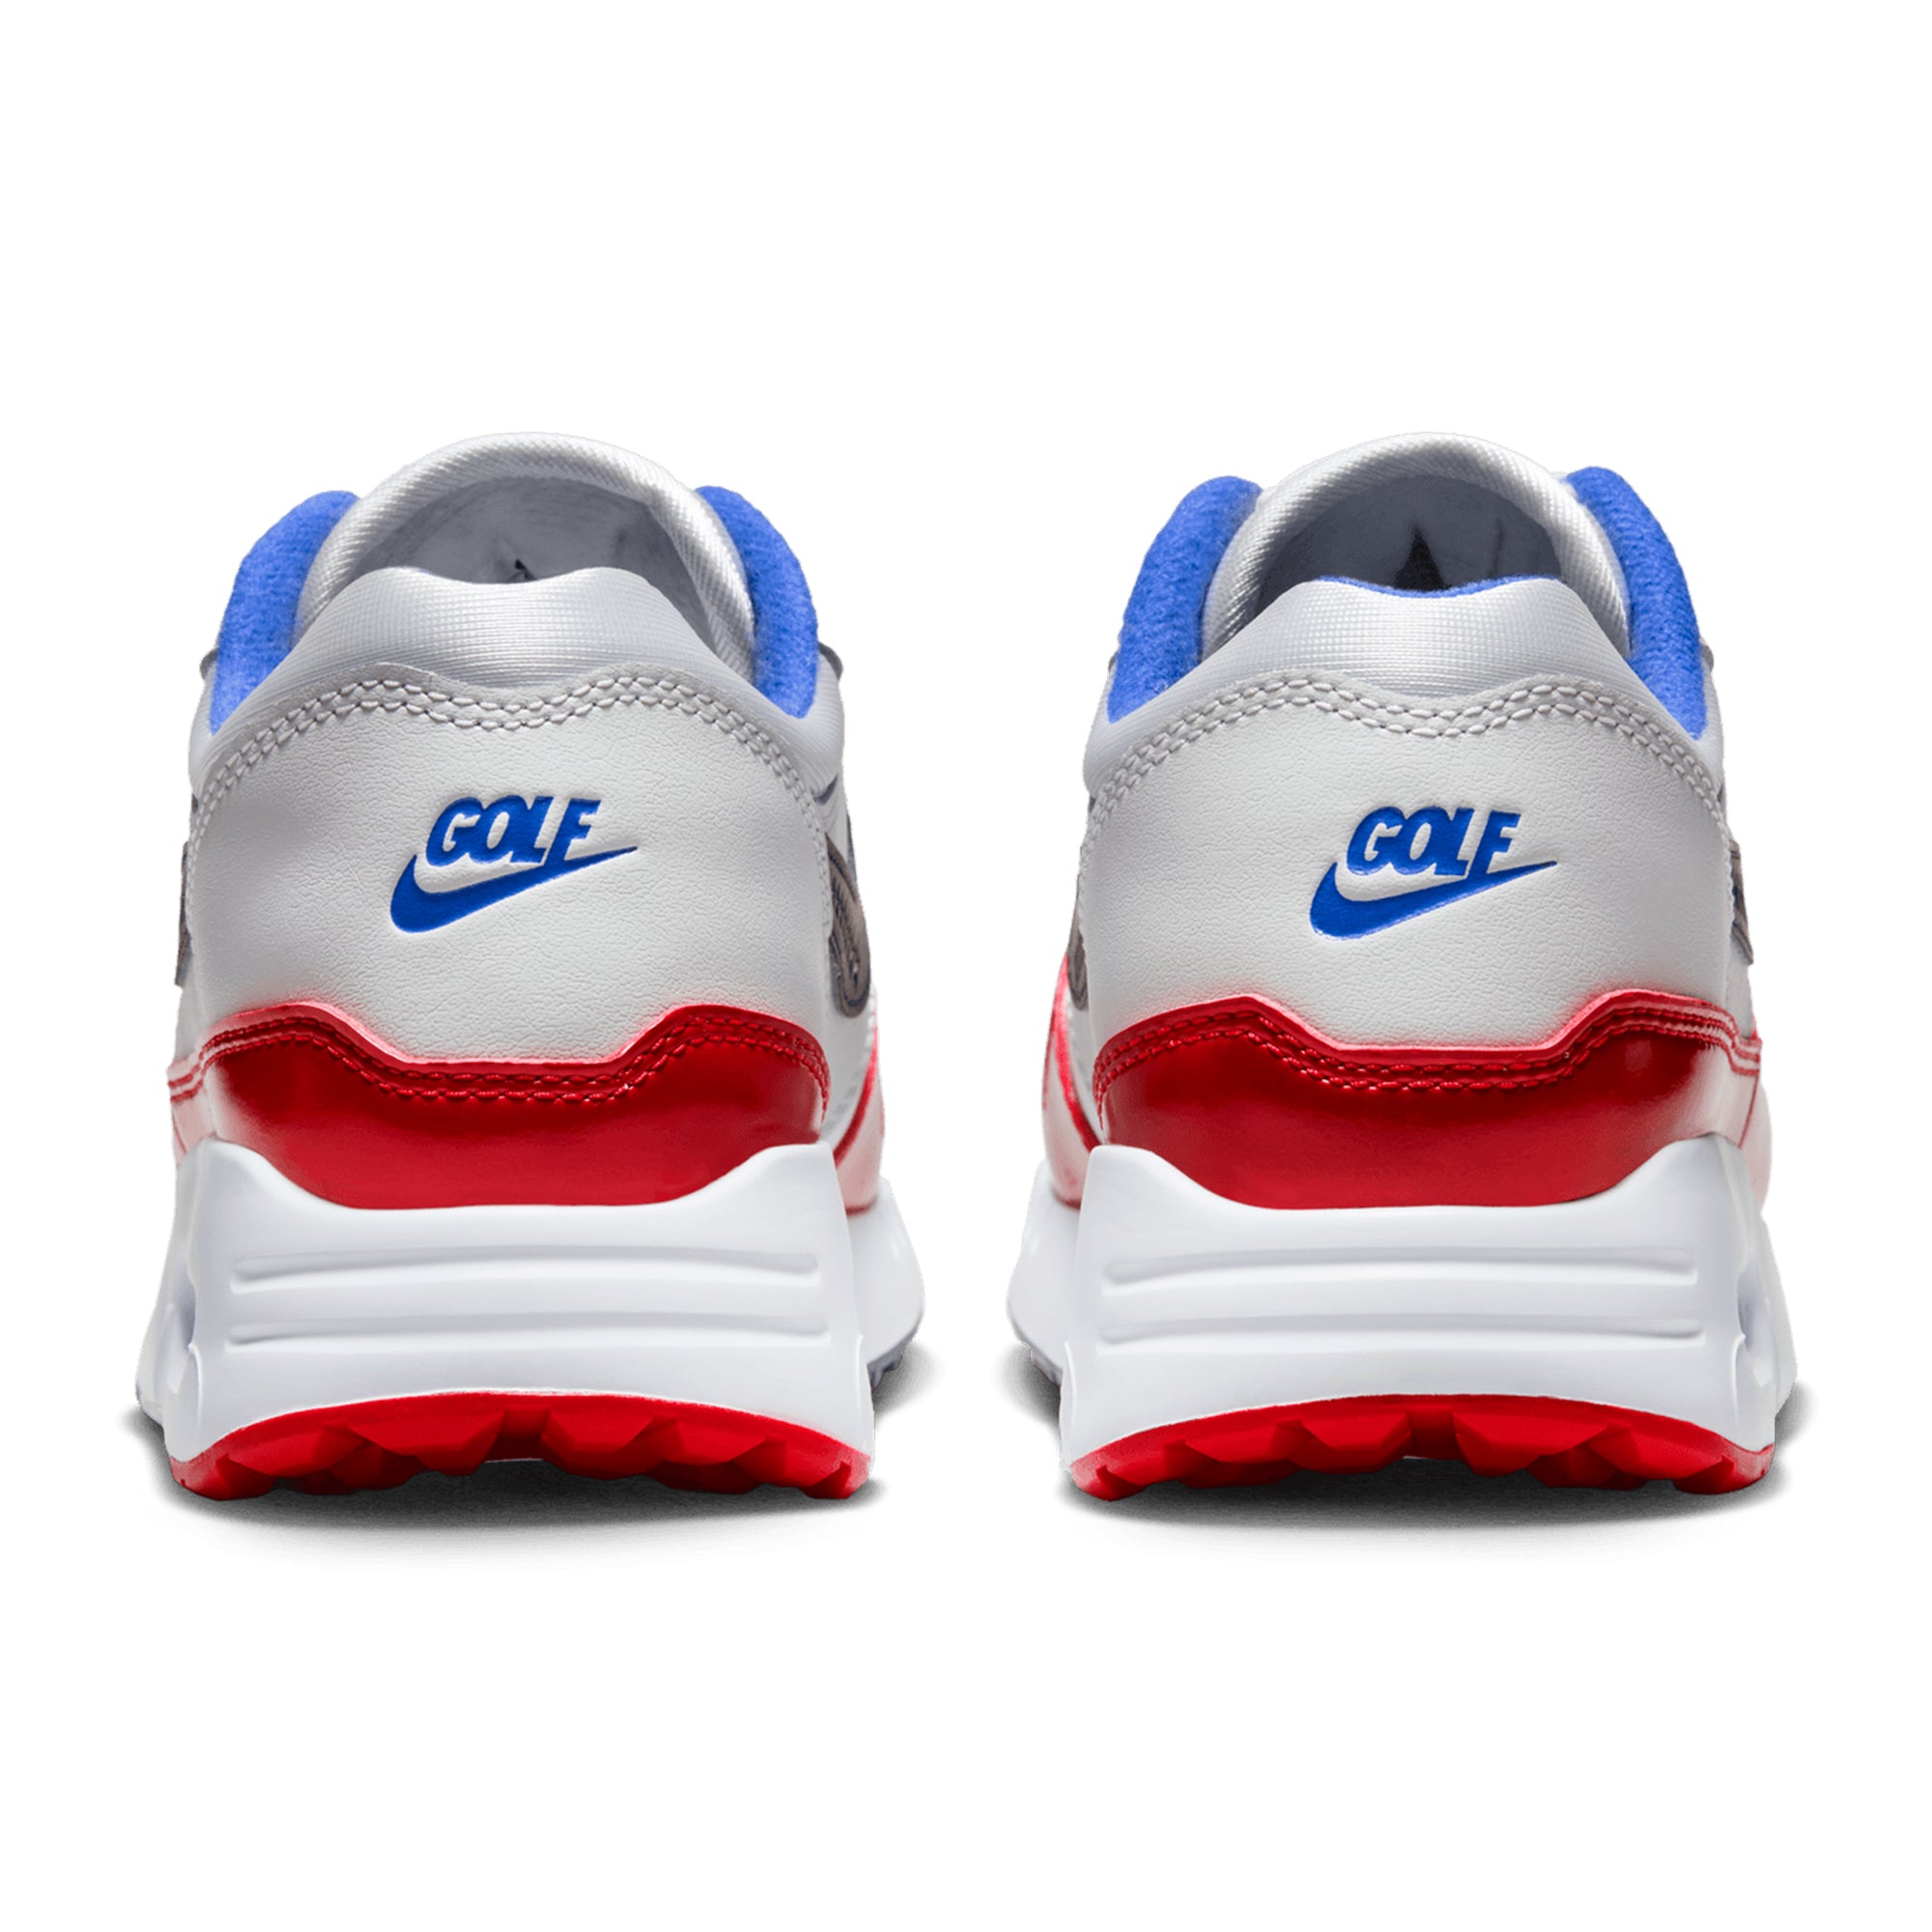 Nike Golf Air Max 1 '86 G Ryder Cup NRG Shoes